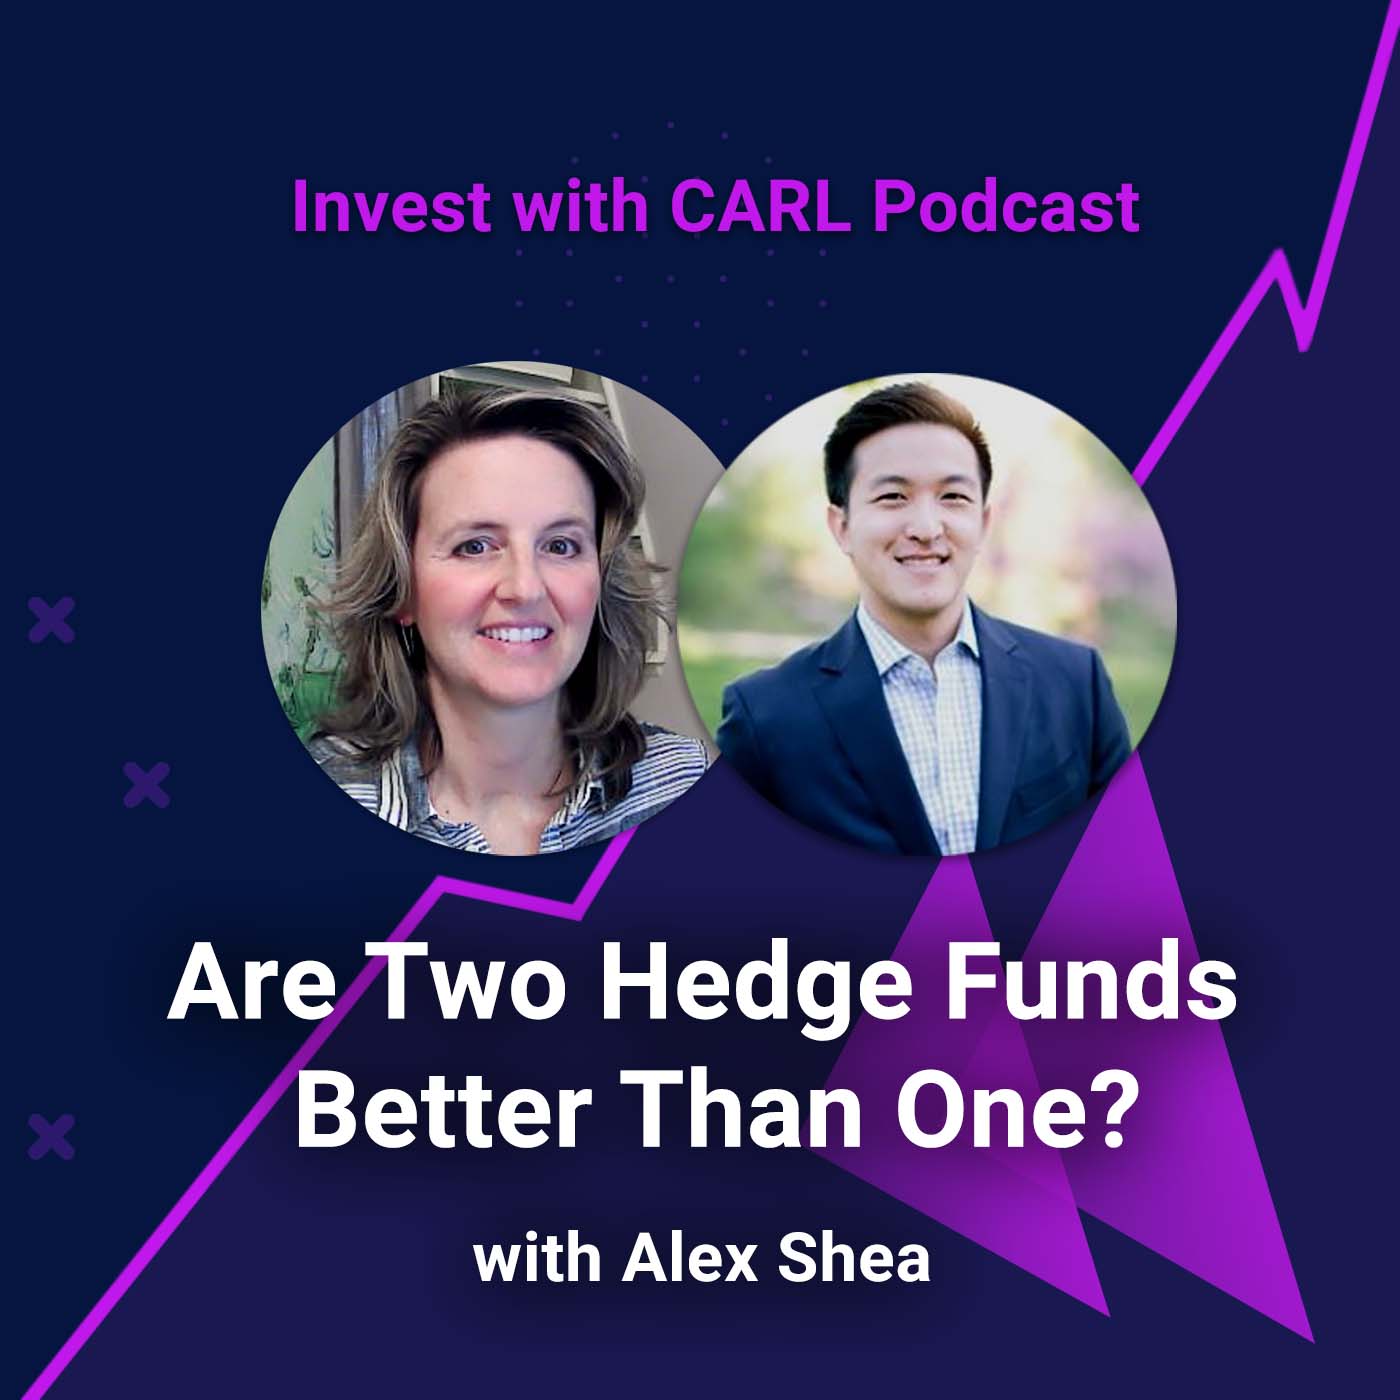 Are Two Hedge Funds Better Than One